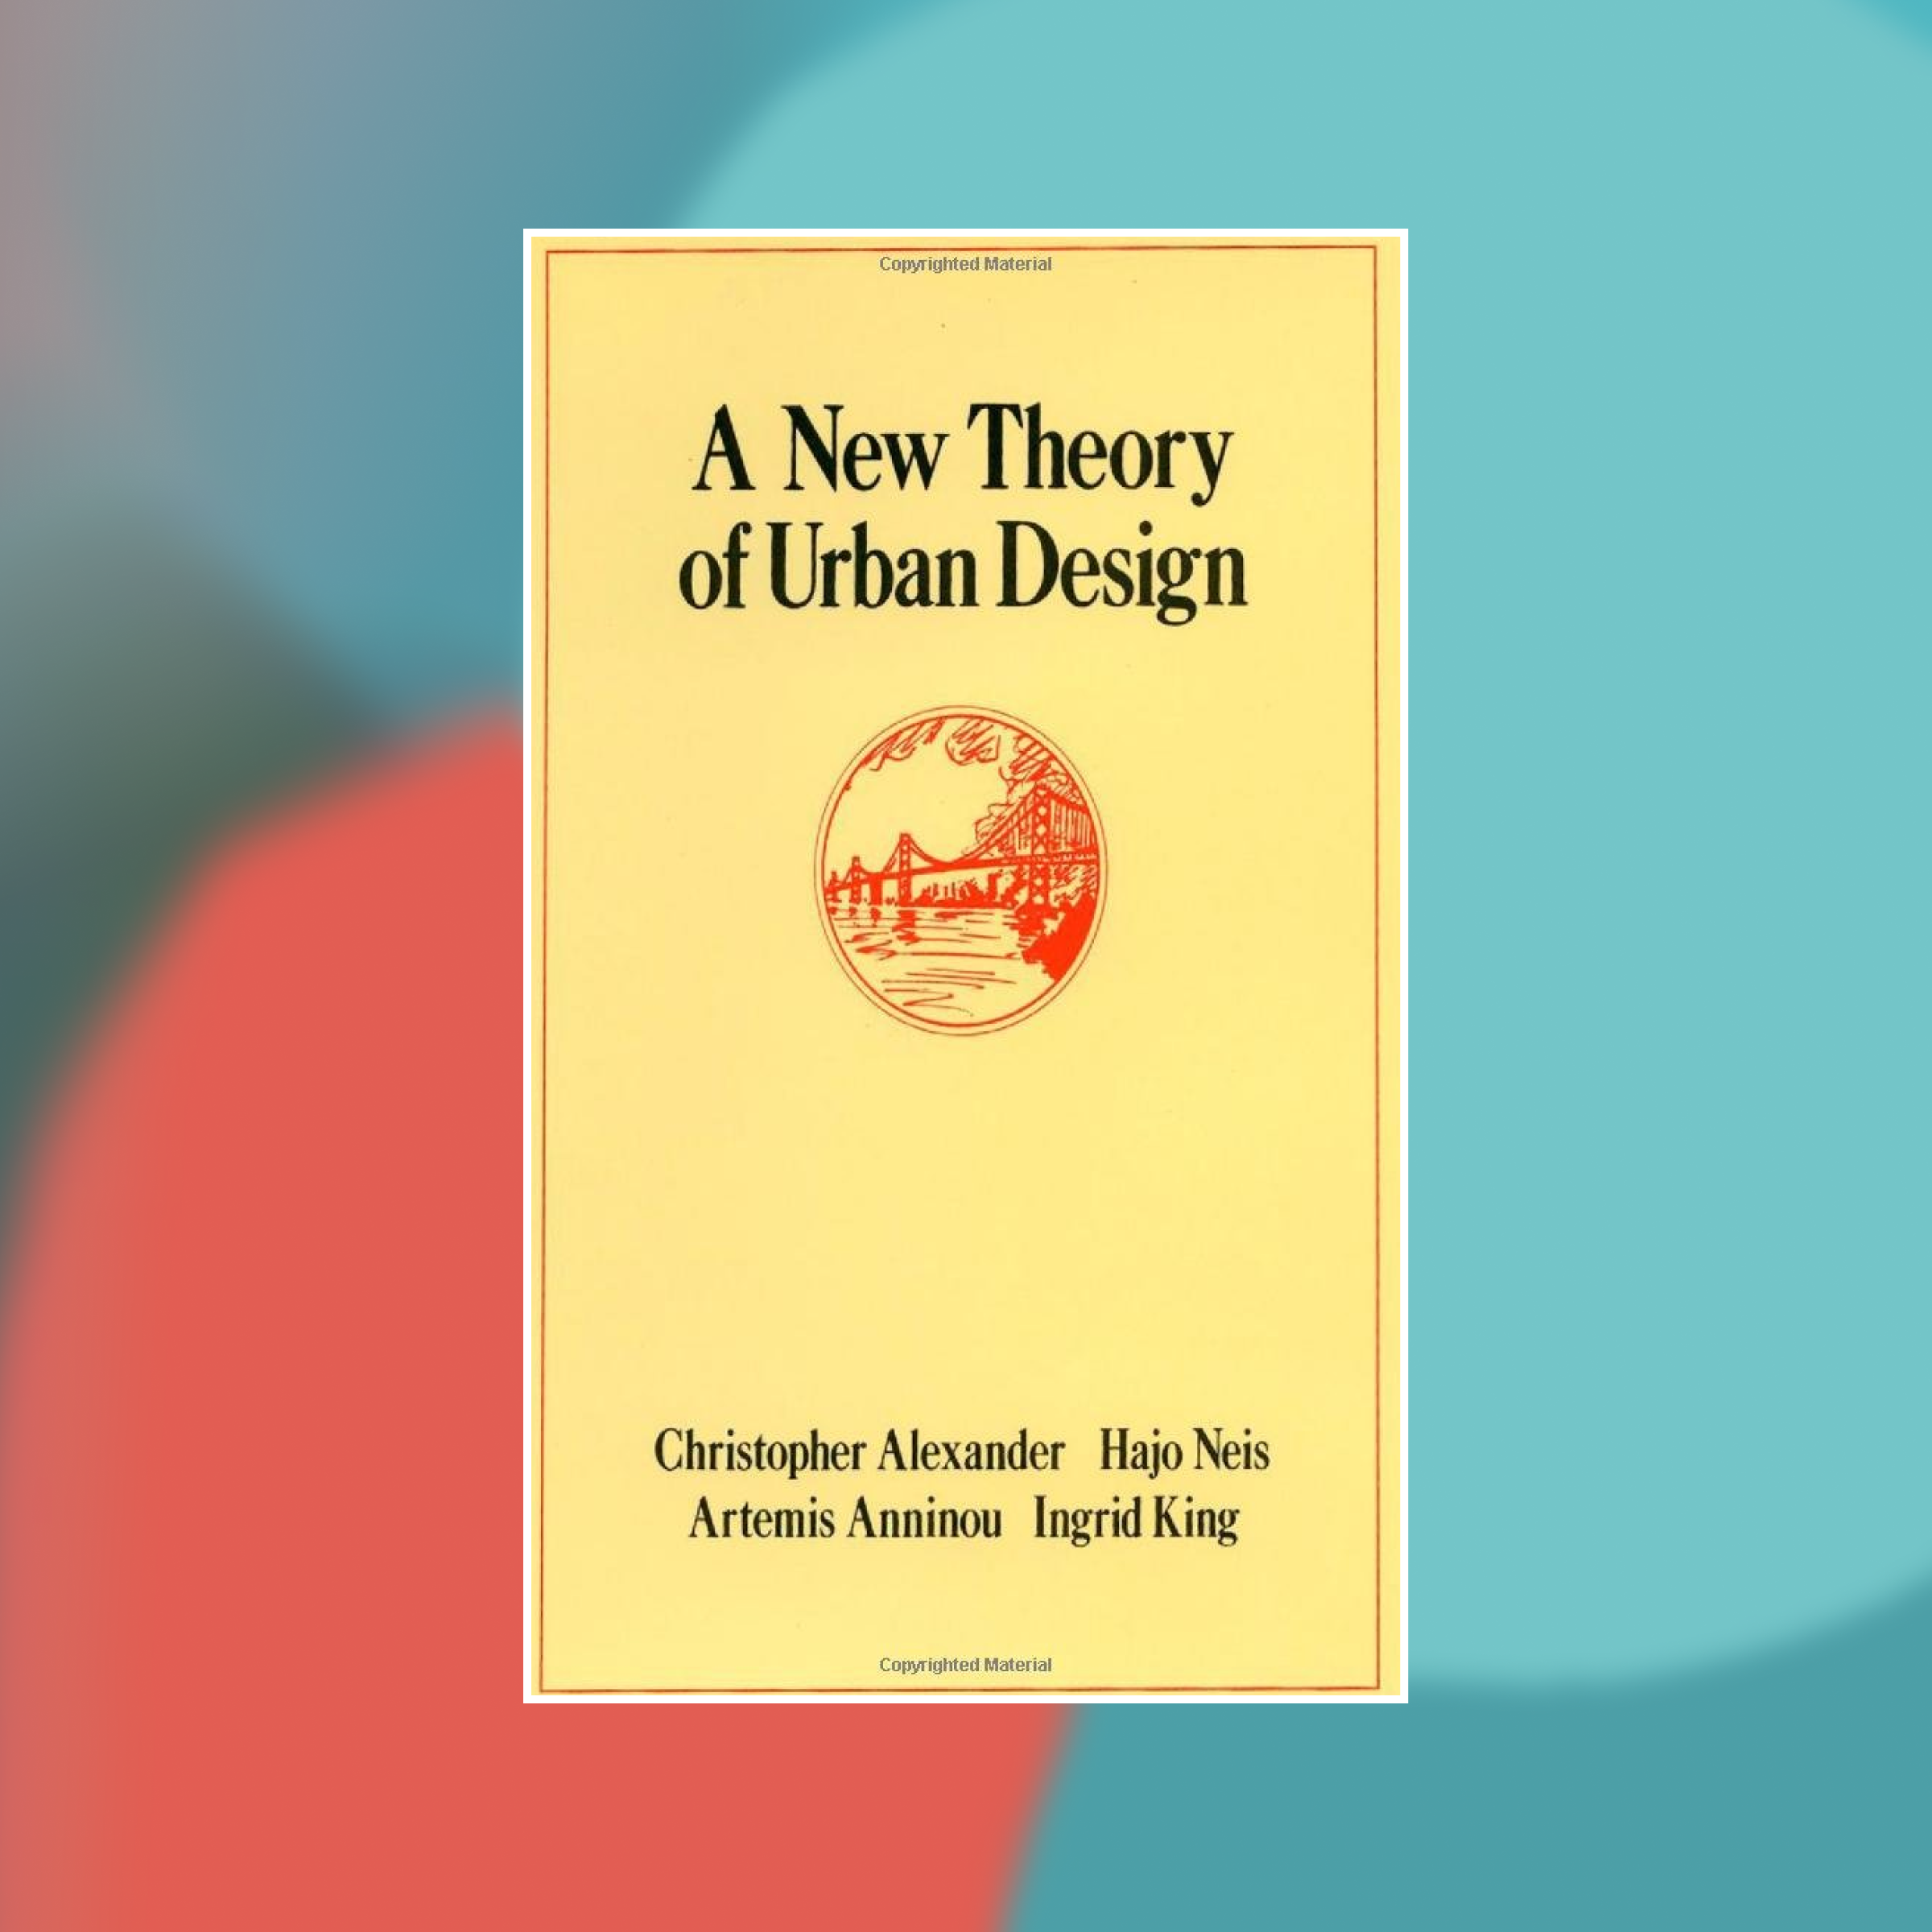 Book cover of A New Theory of Urban Design against an abstract painted background